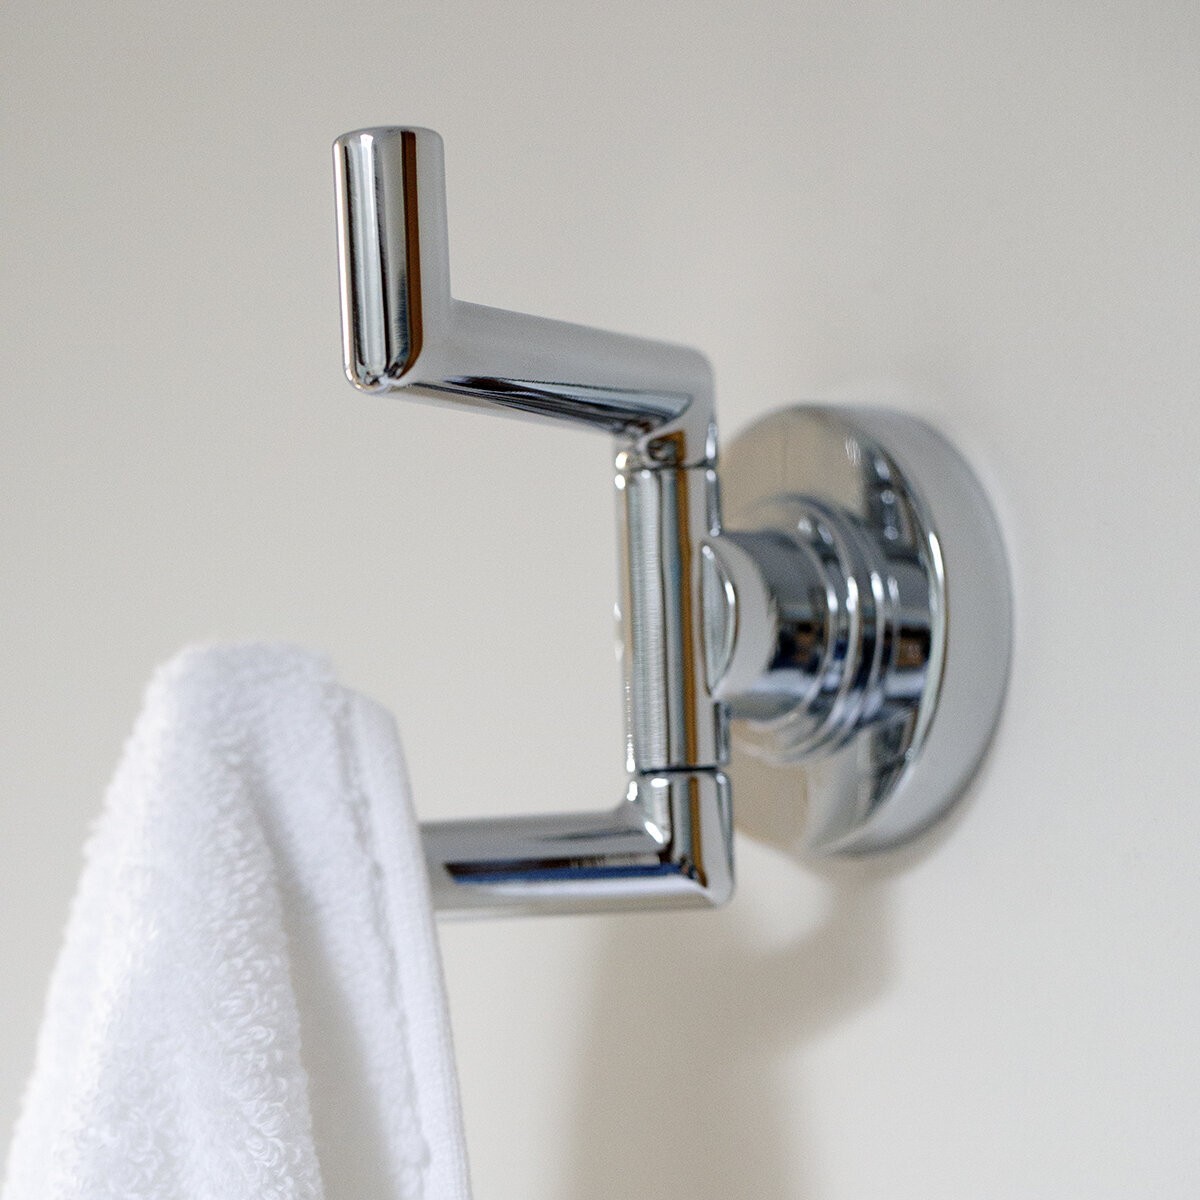 How to Choose a Towel Rack - Foter